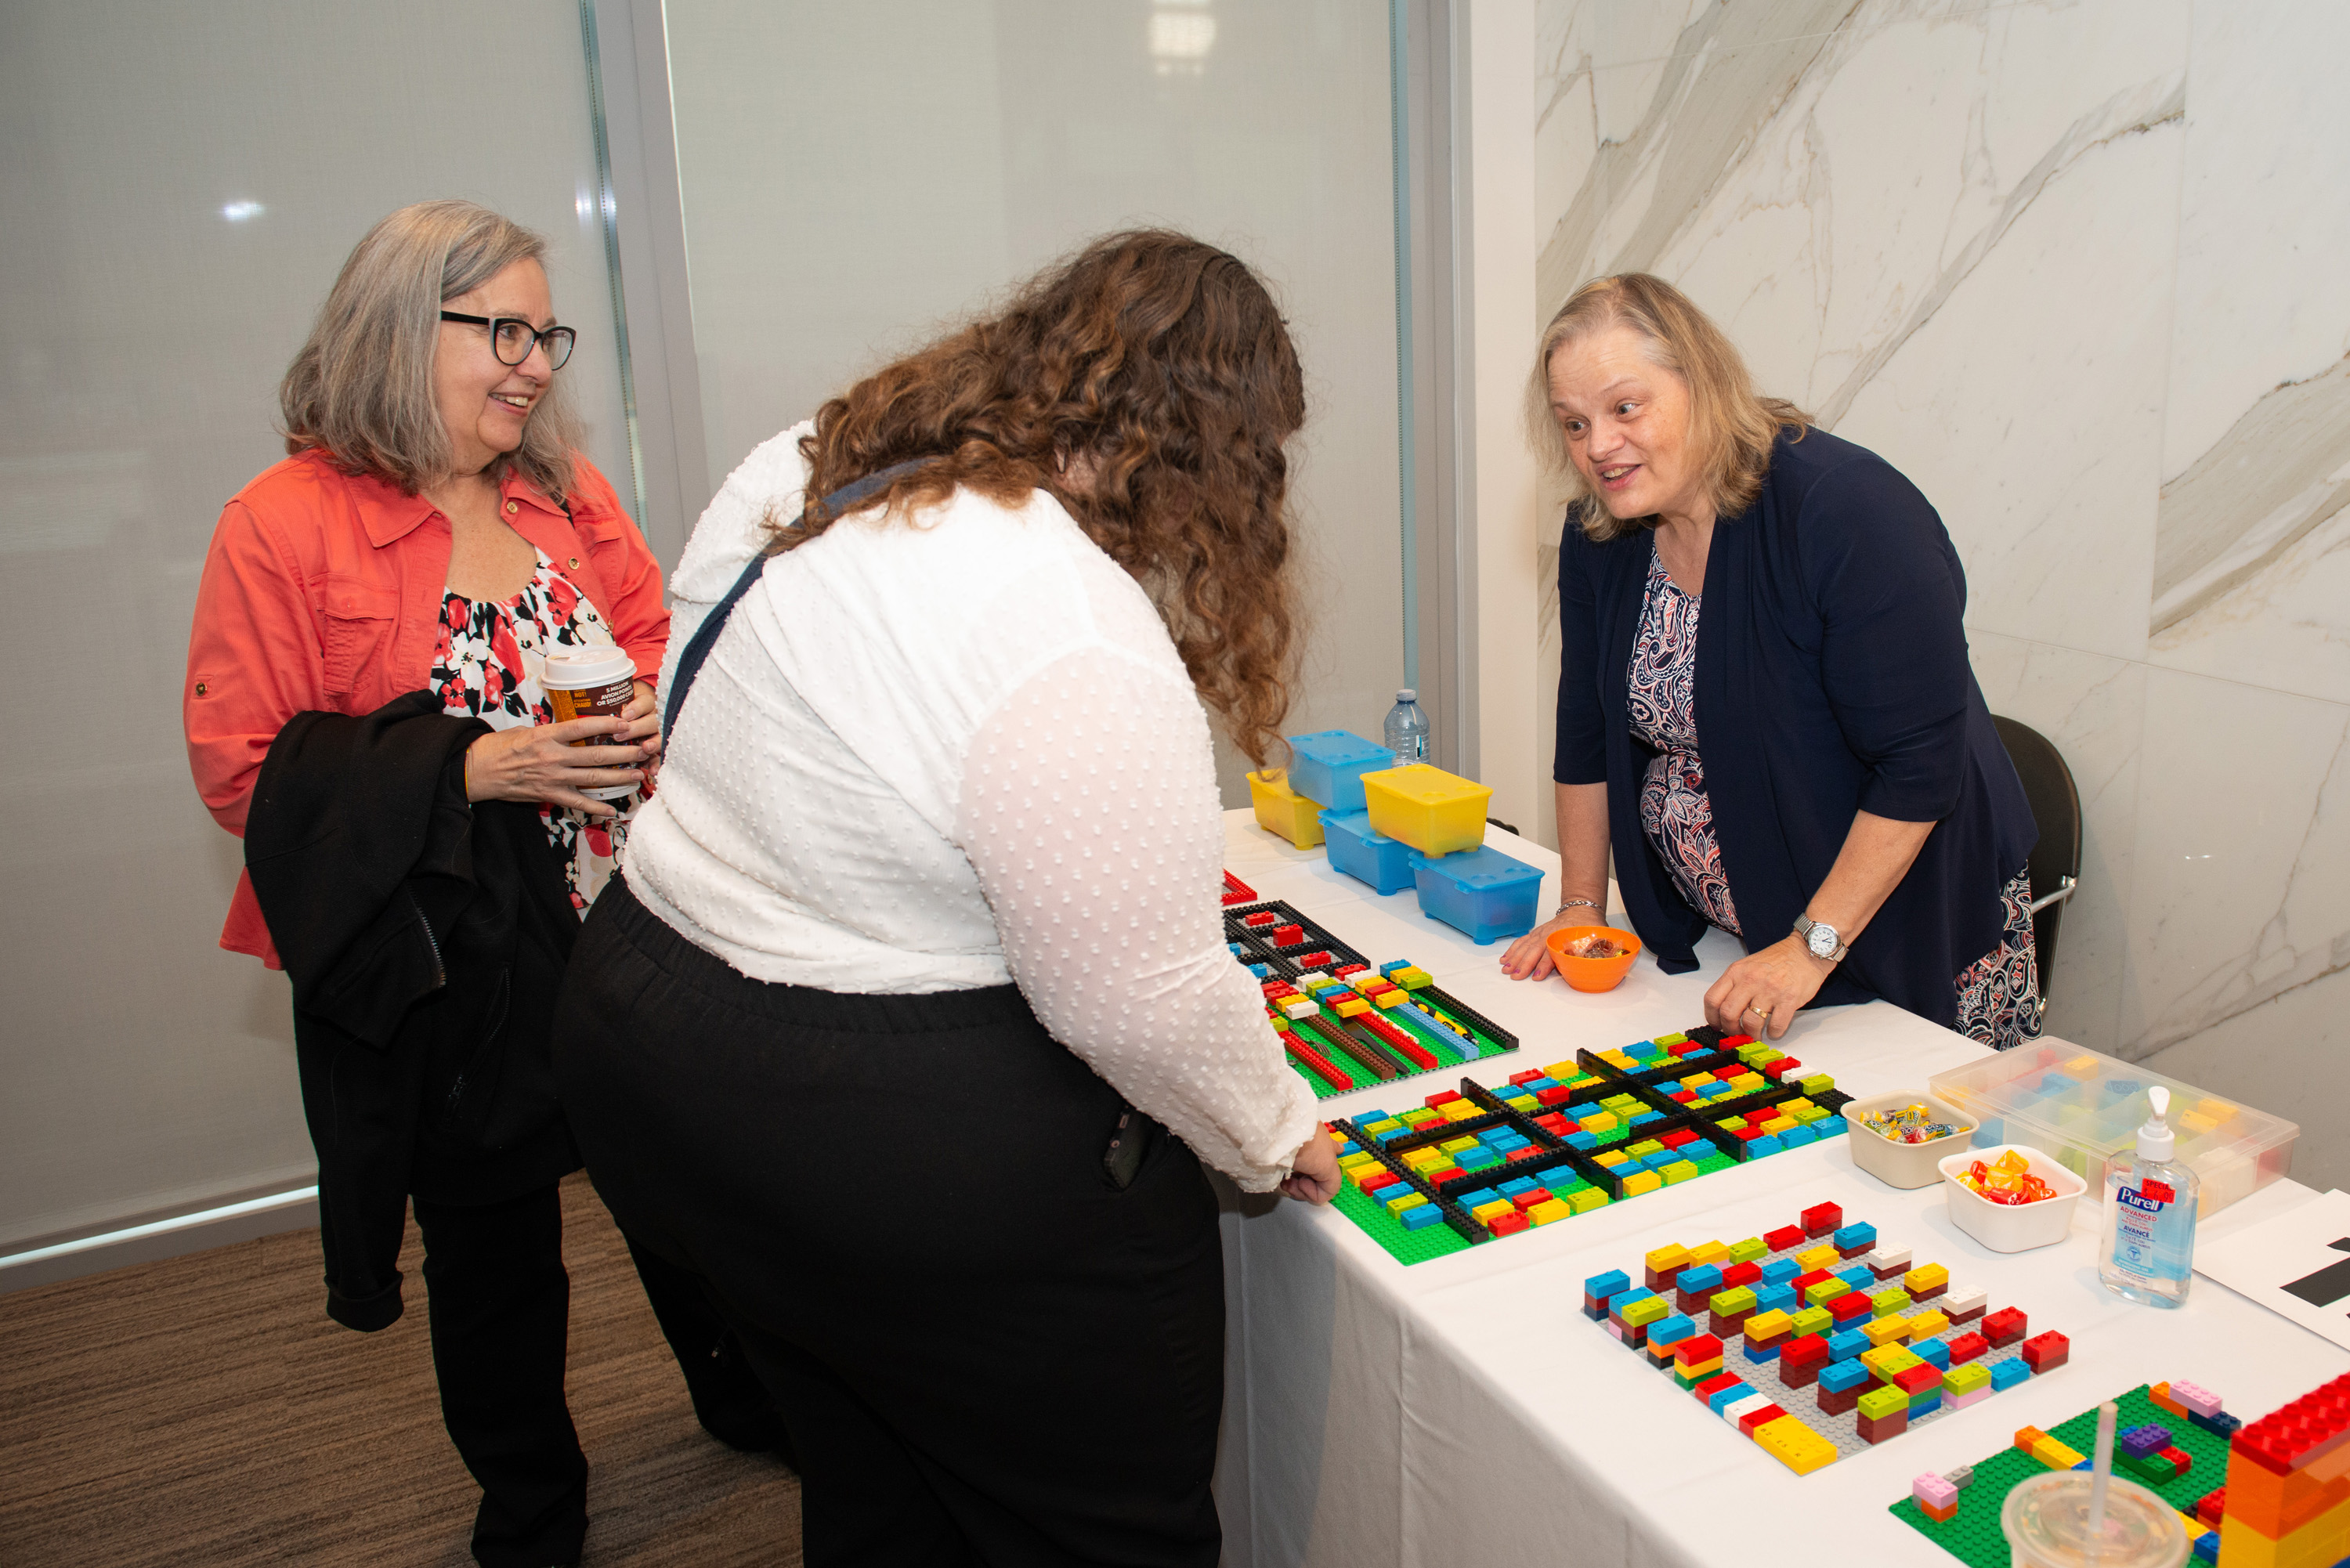 Two people visit a booth in vendor alley. There is a series of lego braille bricks laid out in different arrangements on the table. 